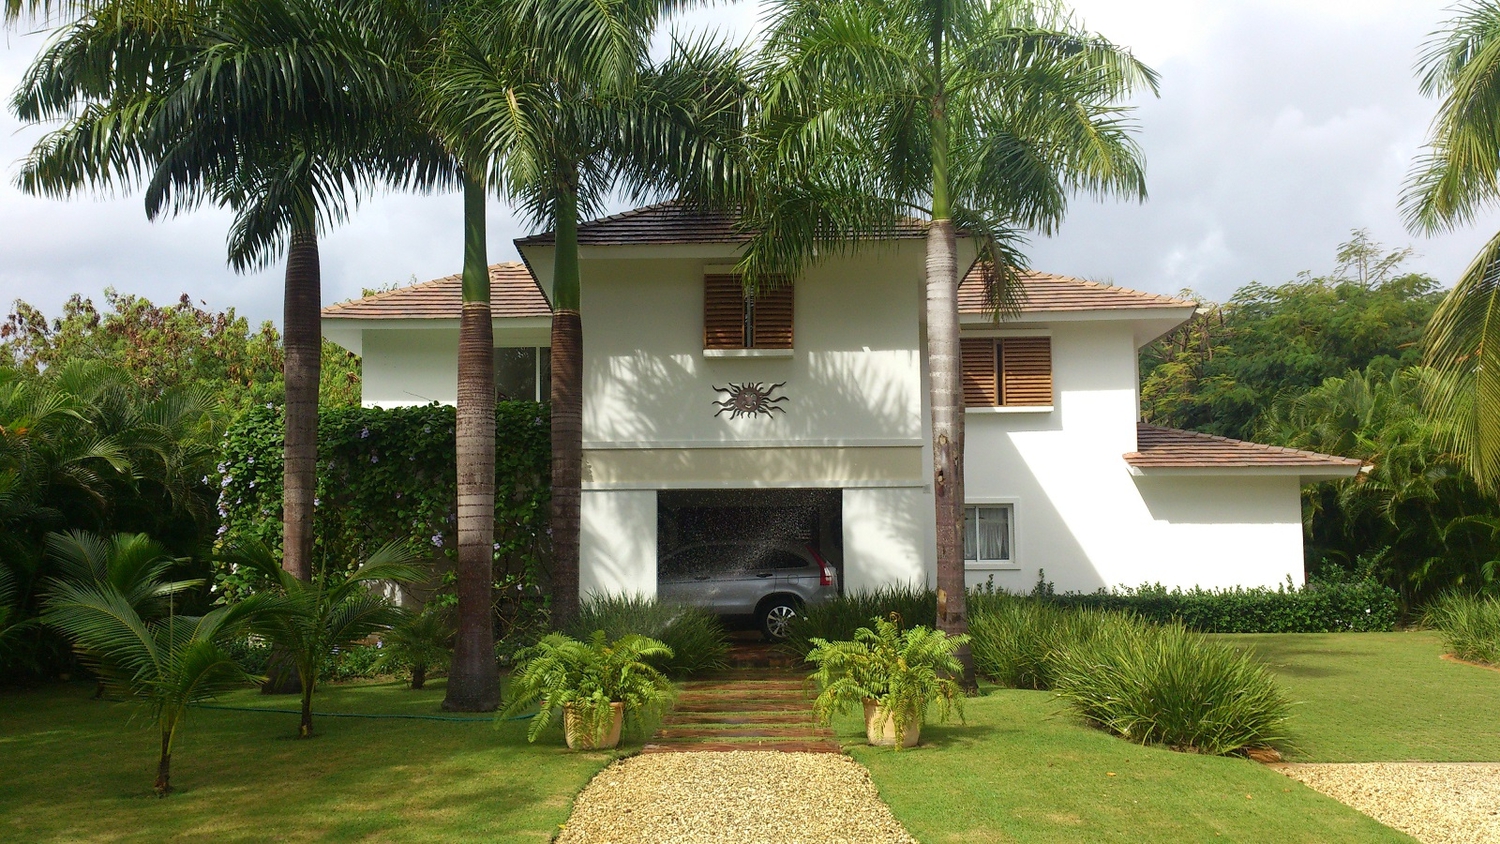 House for rent in Punta Cana with an area of 450 m2